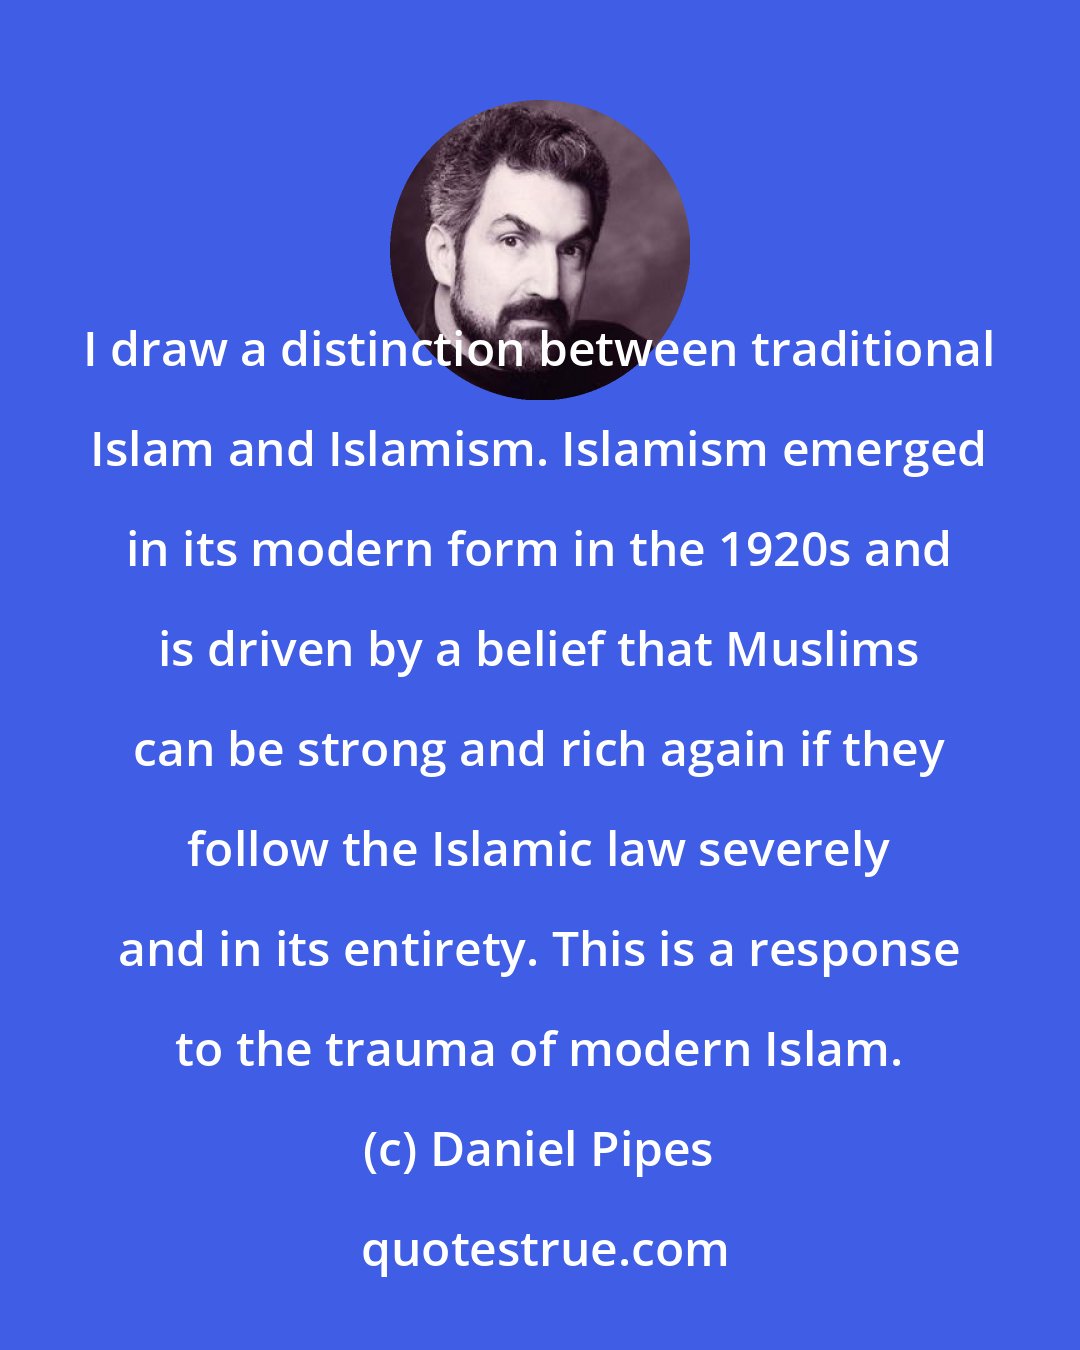 Daniel Pipes: I draw a distinction between traditional Islam and Islamism. Islamism emerged in its modern form in the 1920s and is driven by a belief that Muslims can be strong and rich again if they follow the Islamic law severely and in its entirety. This is a response to the trauma of modern Islam.